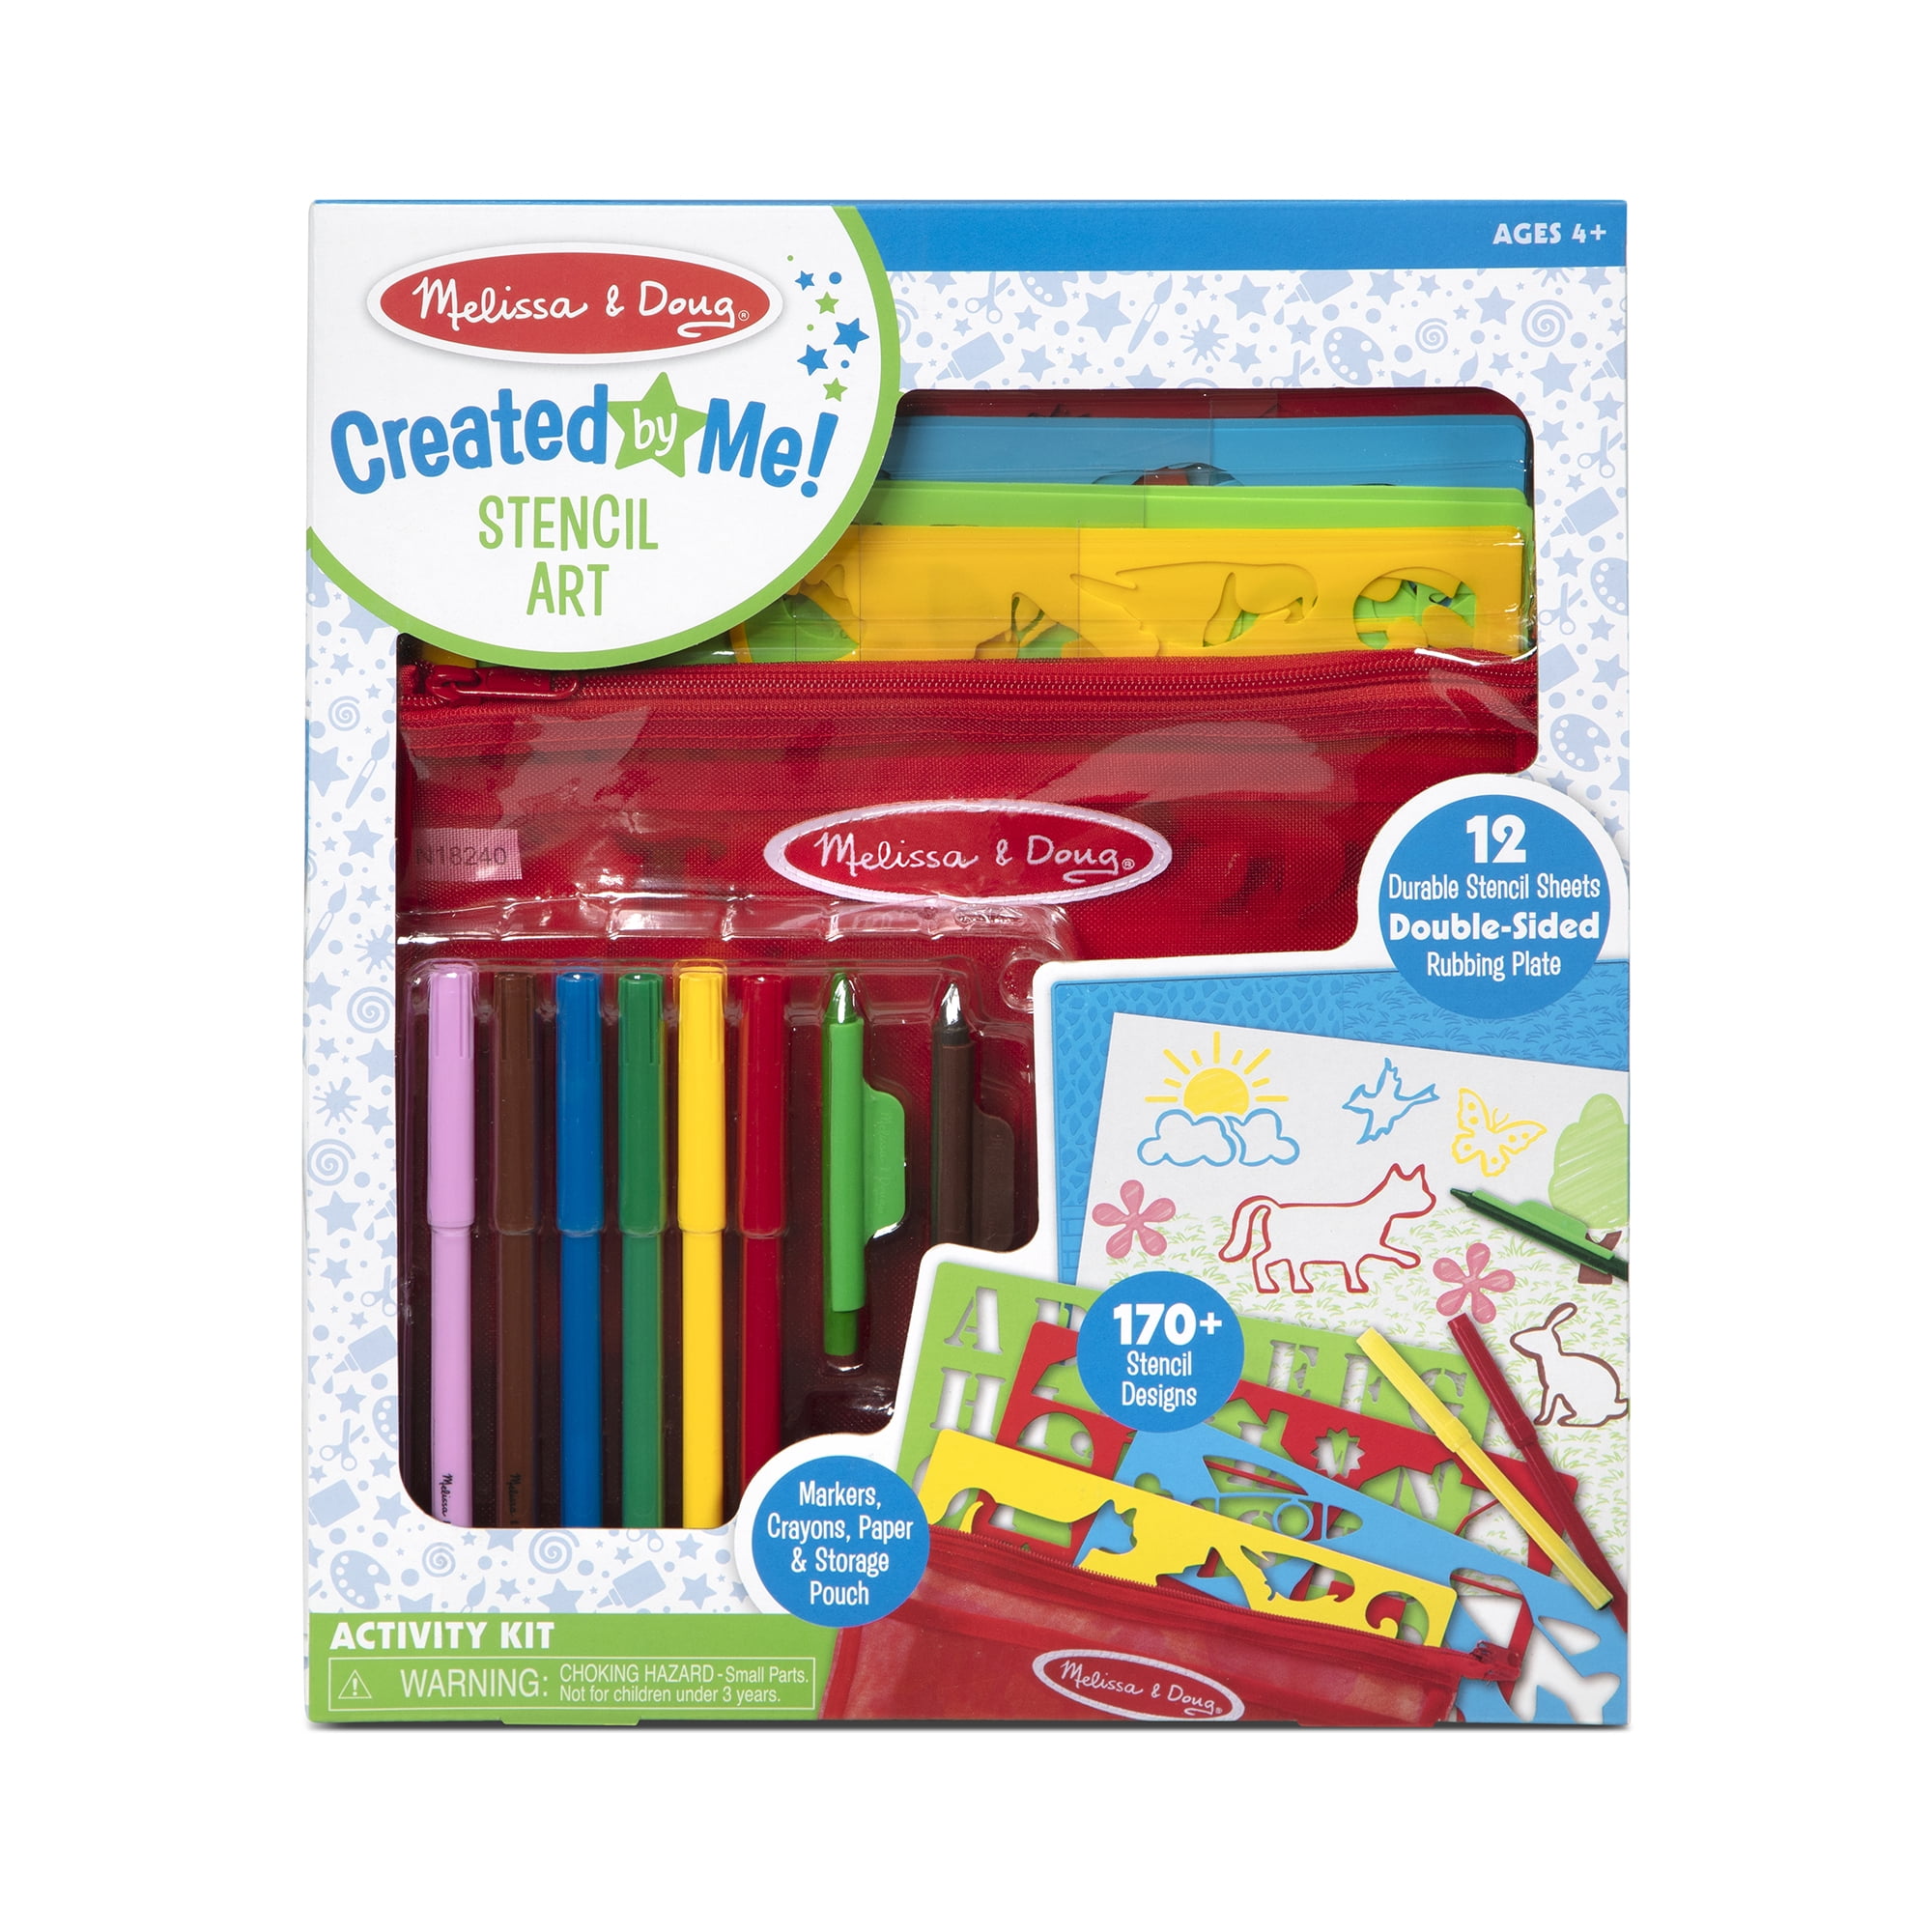 Mimtom mimtom drawing stencil kit for kids, 58 pc art set with 370+ shapes, sketch  pad, and colored pencils for diy arts and crafts